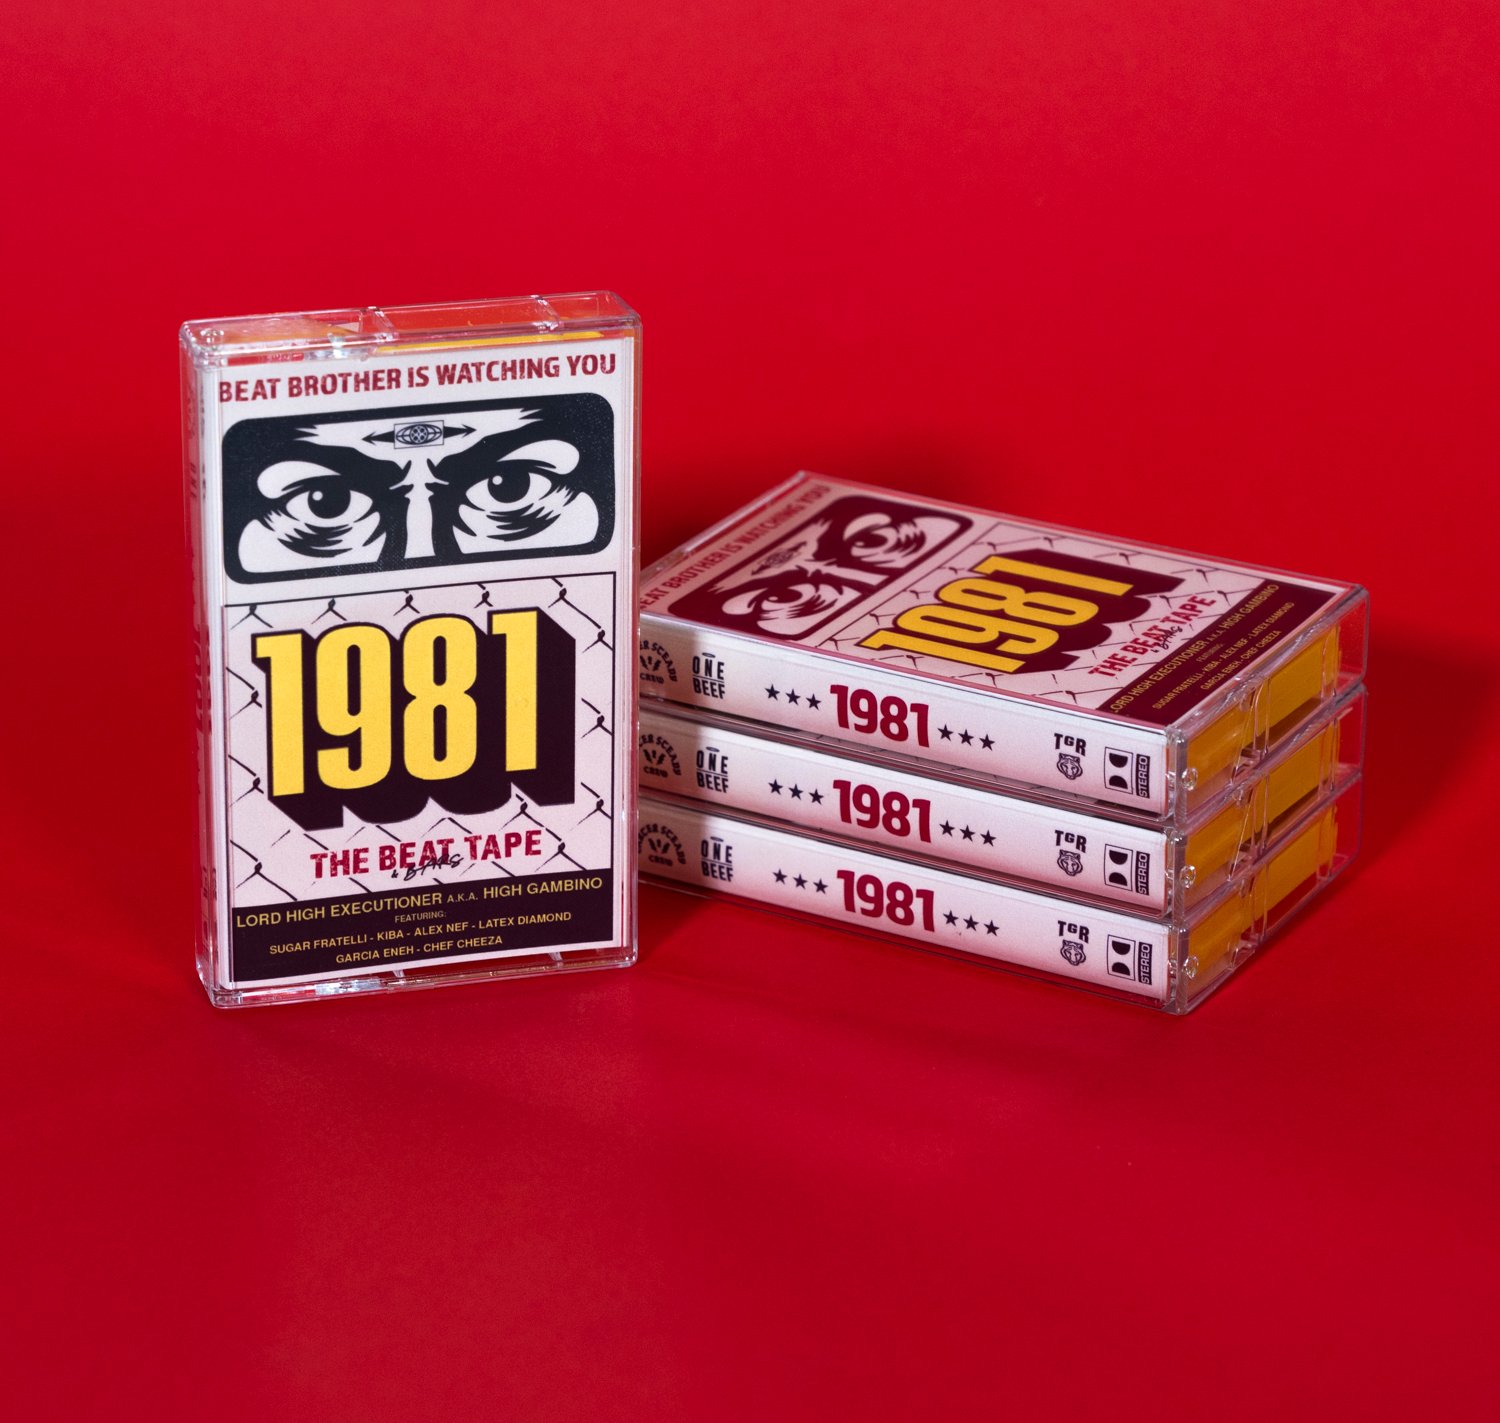 Image of "1981"  The beat tape By: LORD HIGH EXECUTIONER a.k.a HIGH GAMBINO.